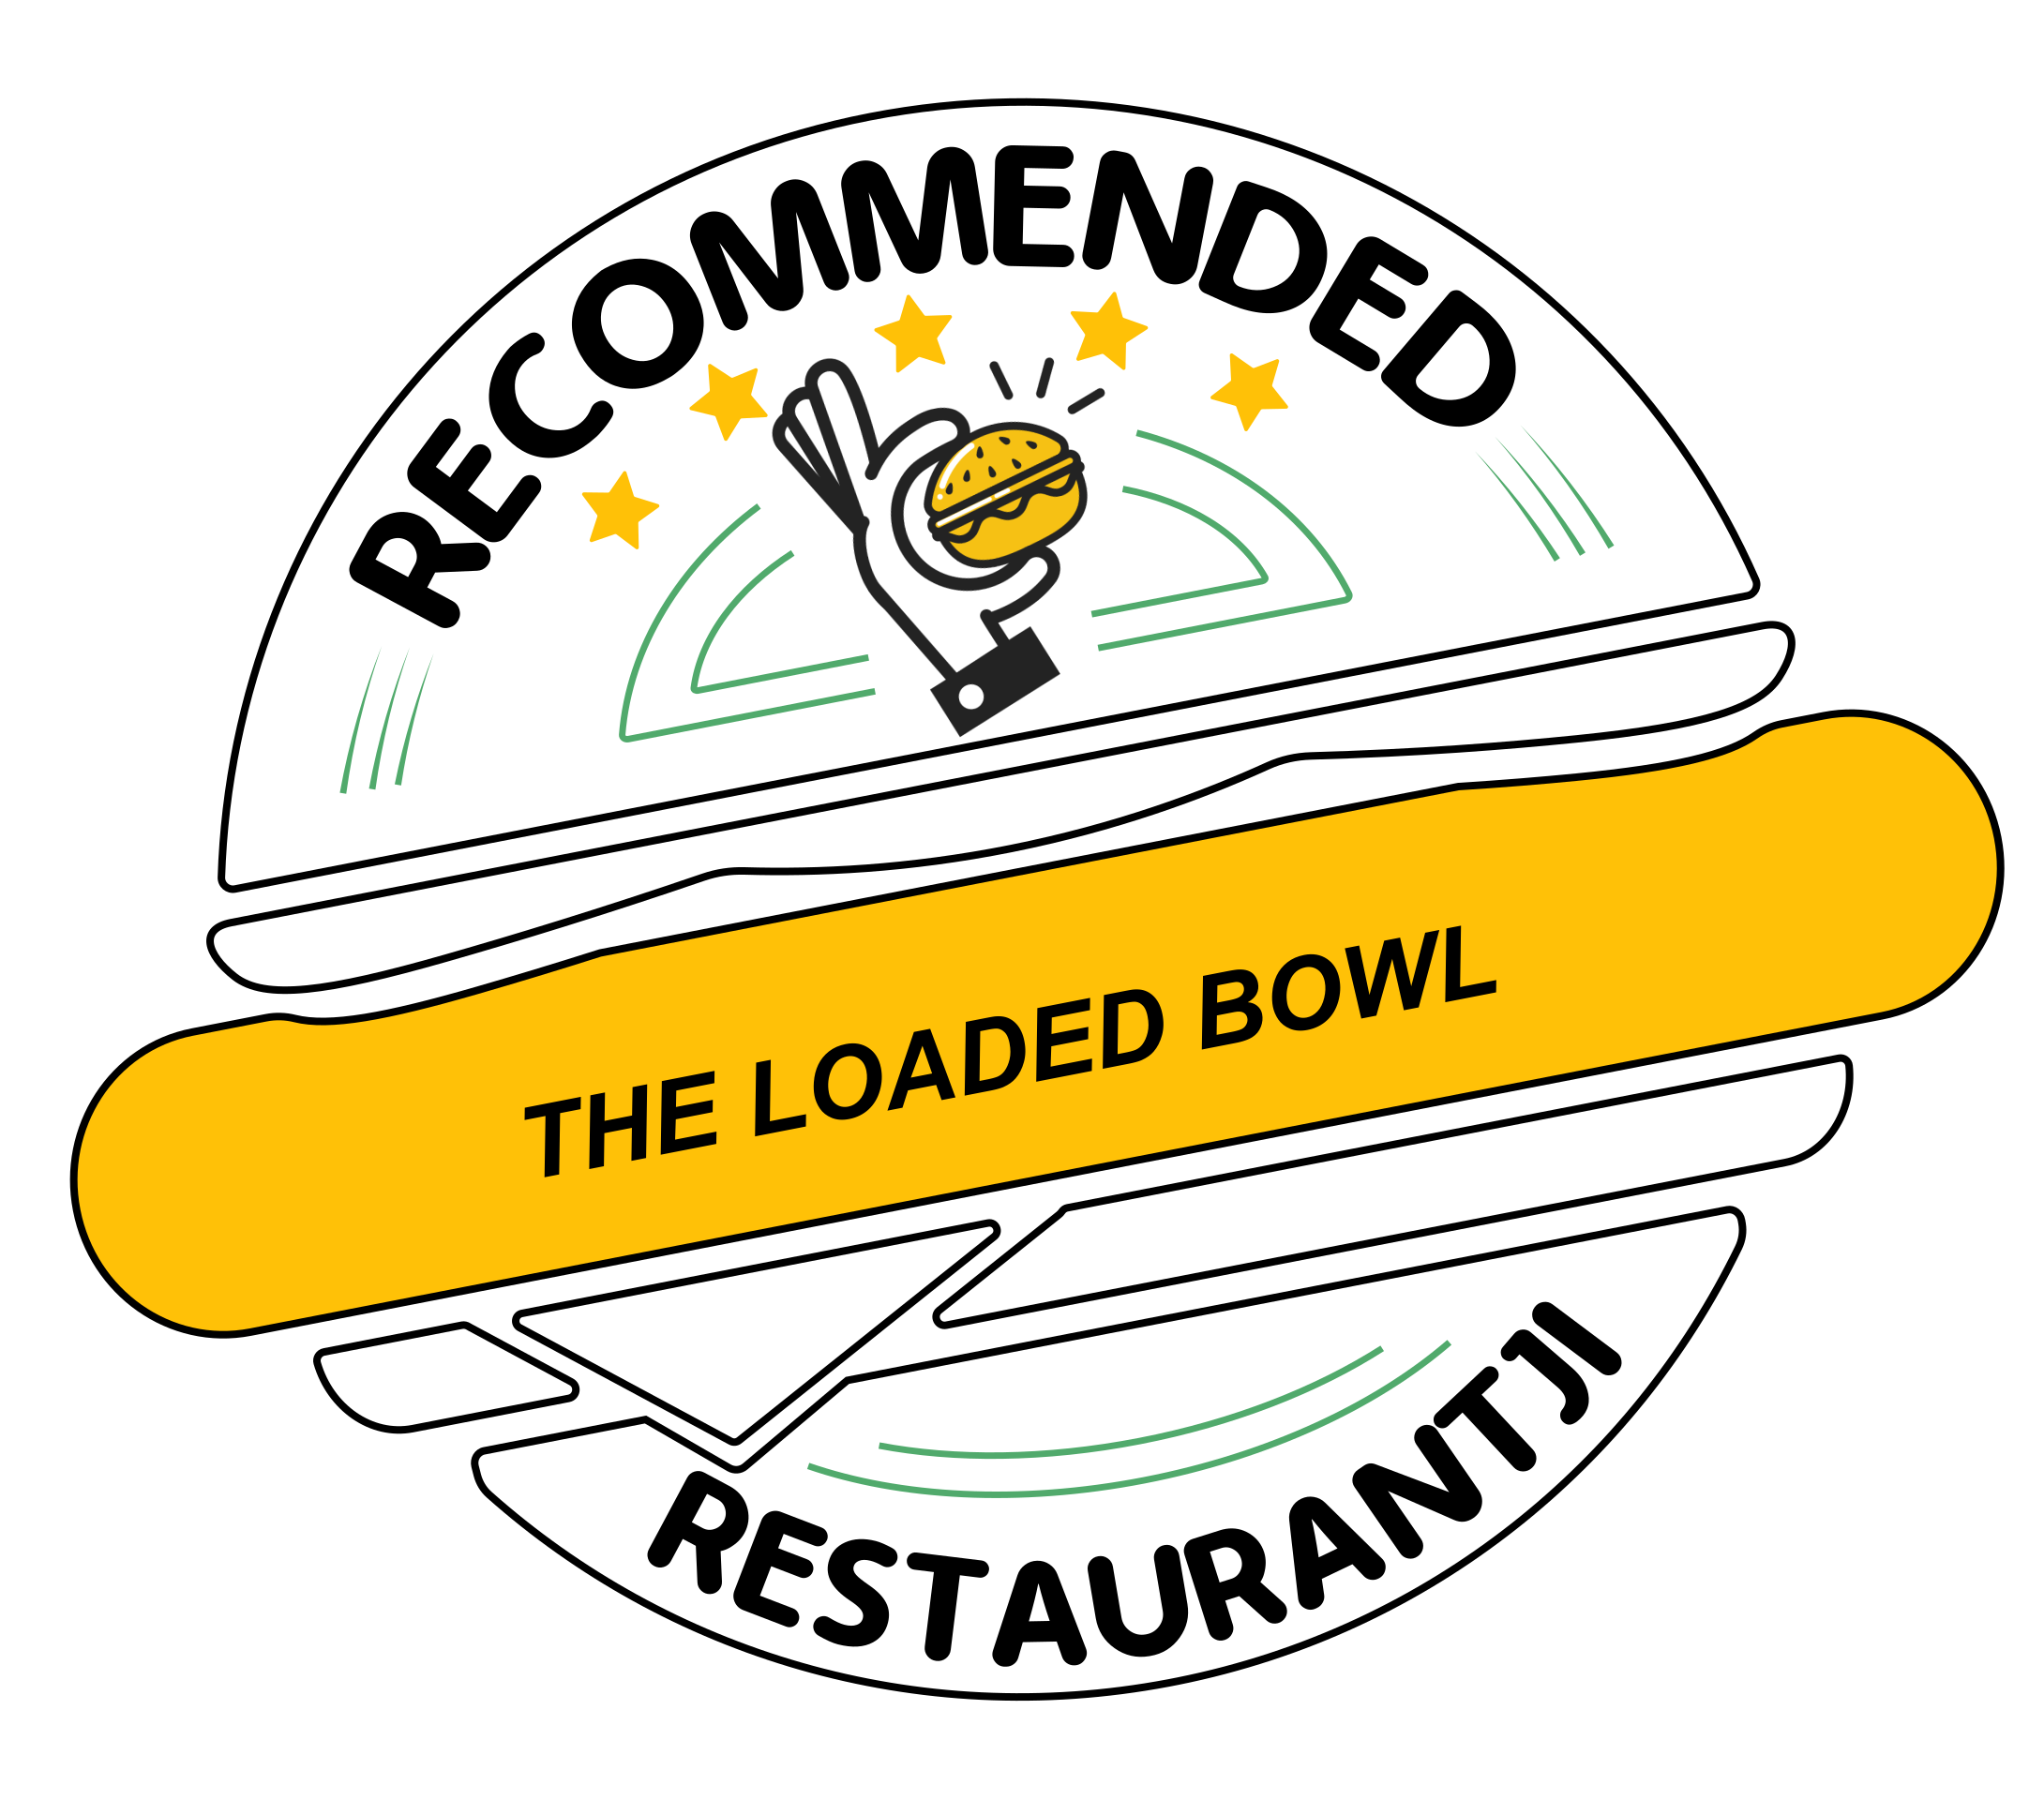 The Loaded Bowl has earned accolades from Restaurantji - a user-friendly platform for discovering the finest local restaurants.